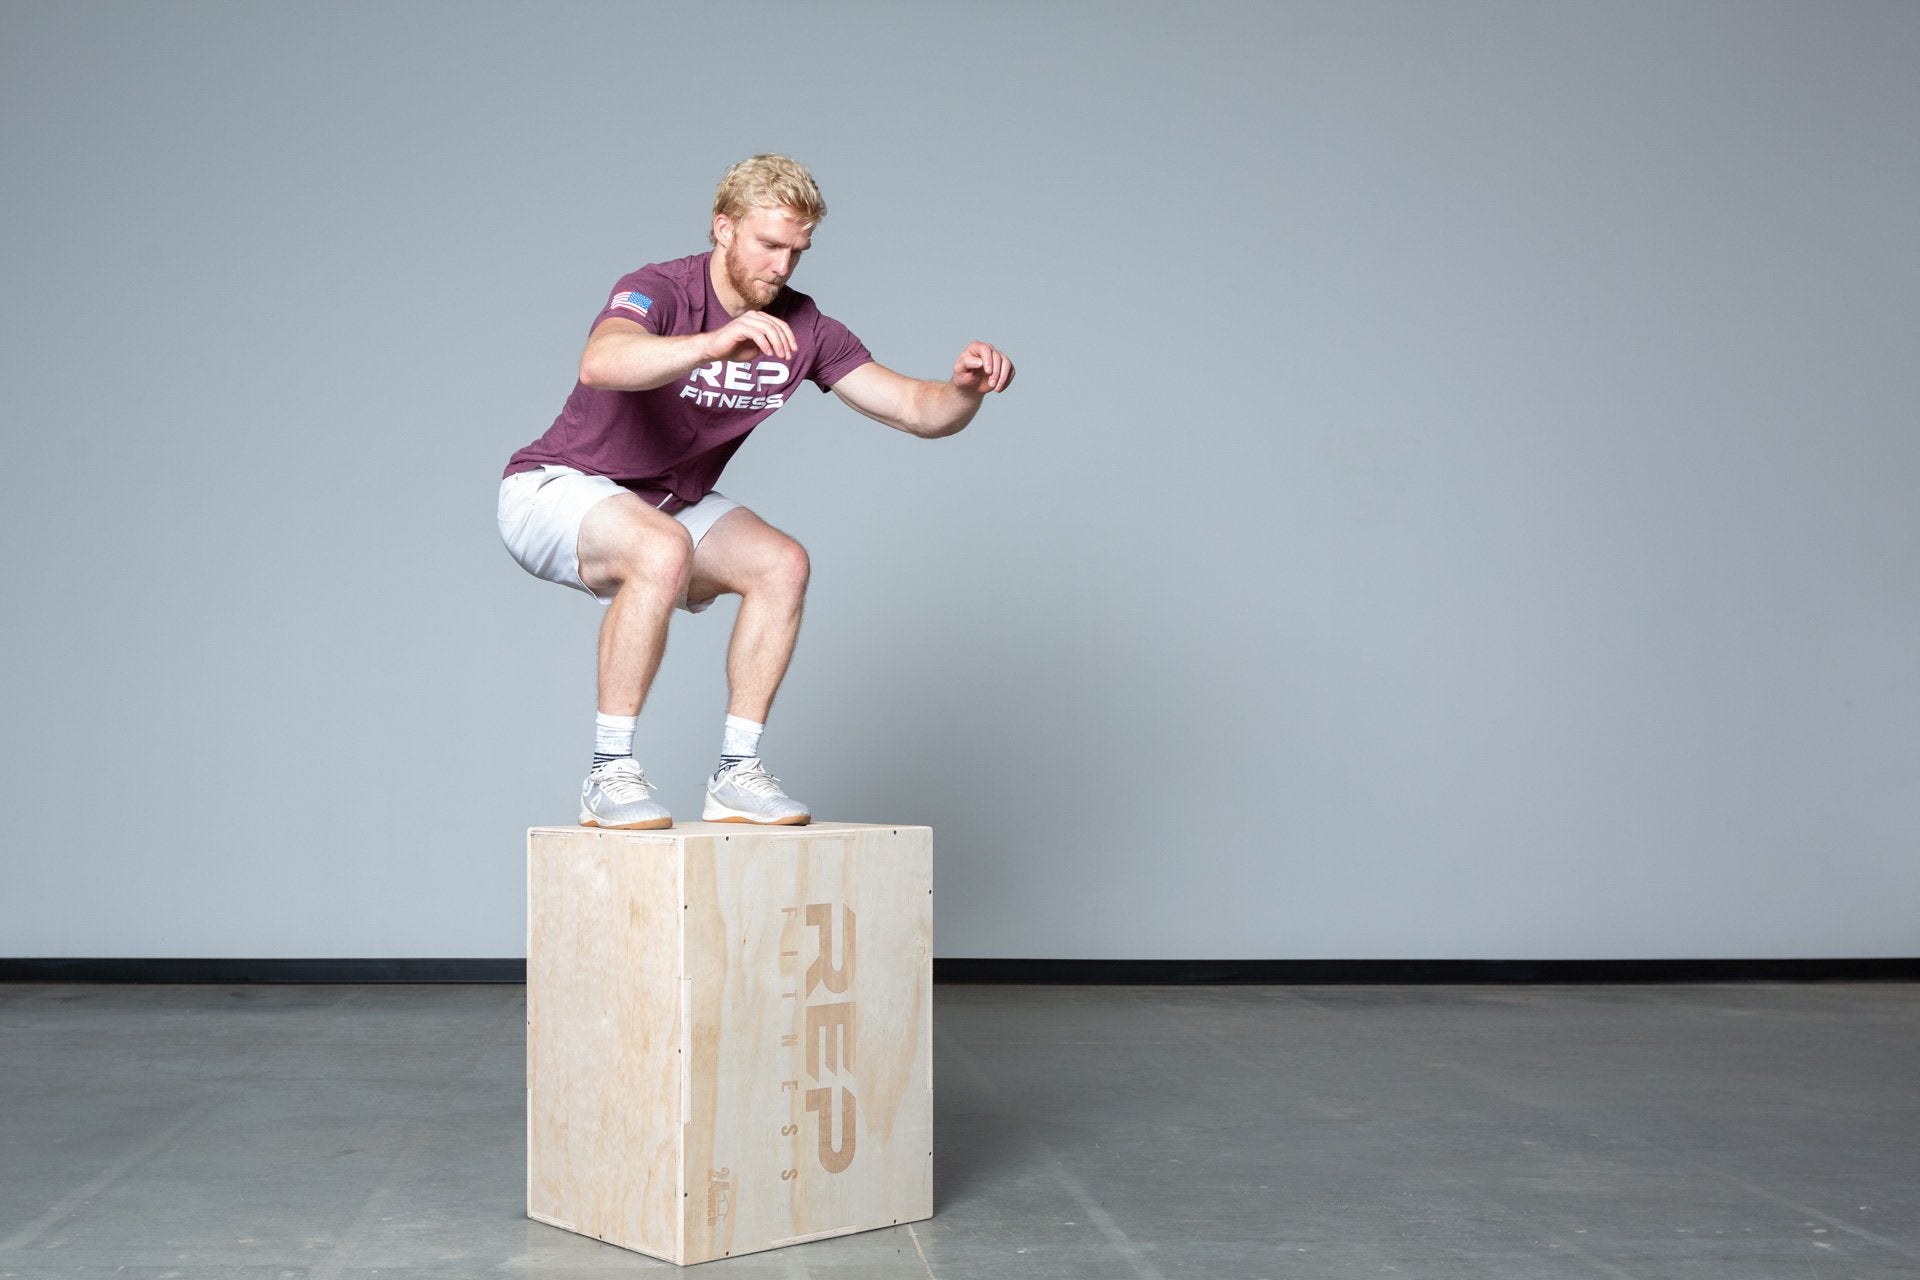 Lifter performing box jumps on a Large REP 3-in-1 Wood Plyo Box.